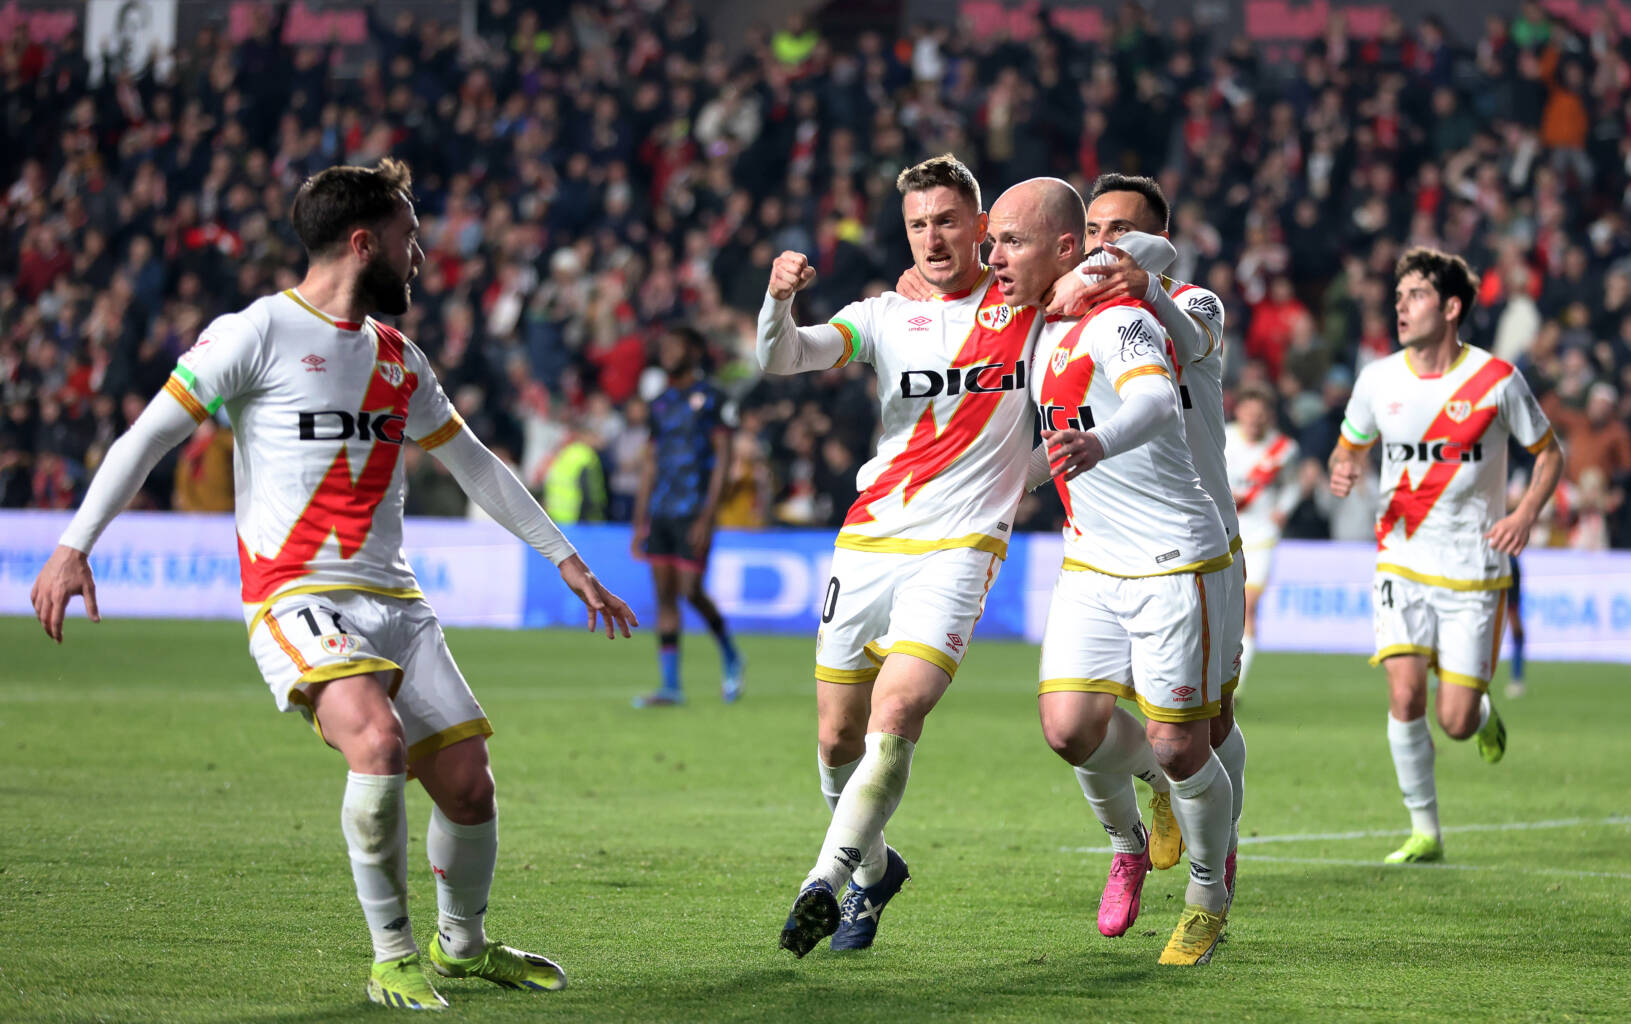 MADRID, SPAIN - FEBRUARY 05: Isi Palazon of Rayo Vallecano celebrates scoring his team's first goal with teammates during the LaLiga EA Sports match between Rayo Vallecano and Sevilla FC at Estadio de Vallecas on February 05, 2024 in Madrid, Spain. (Photo by Florencia Tan Jun/Getty Images)